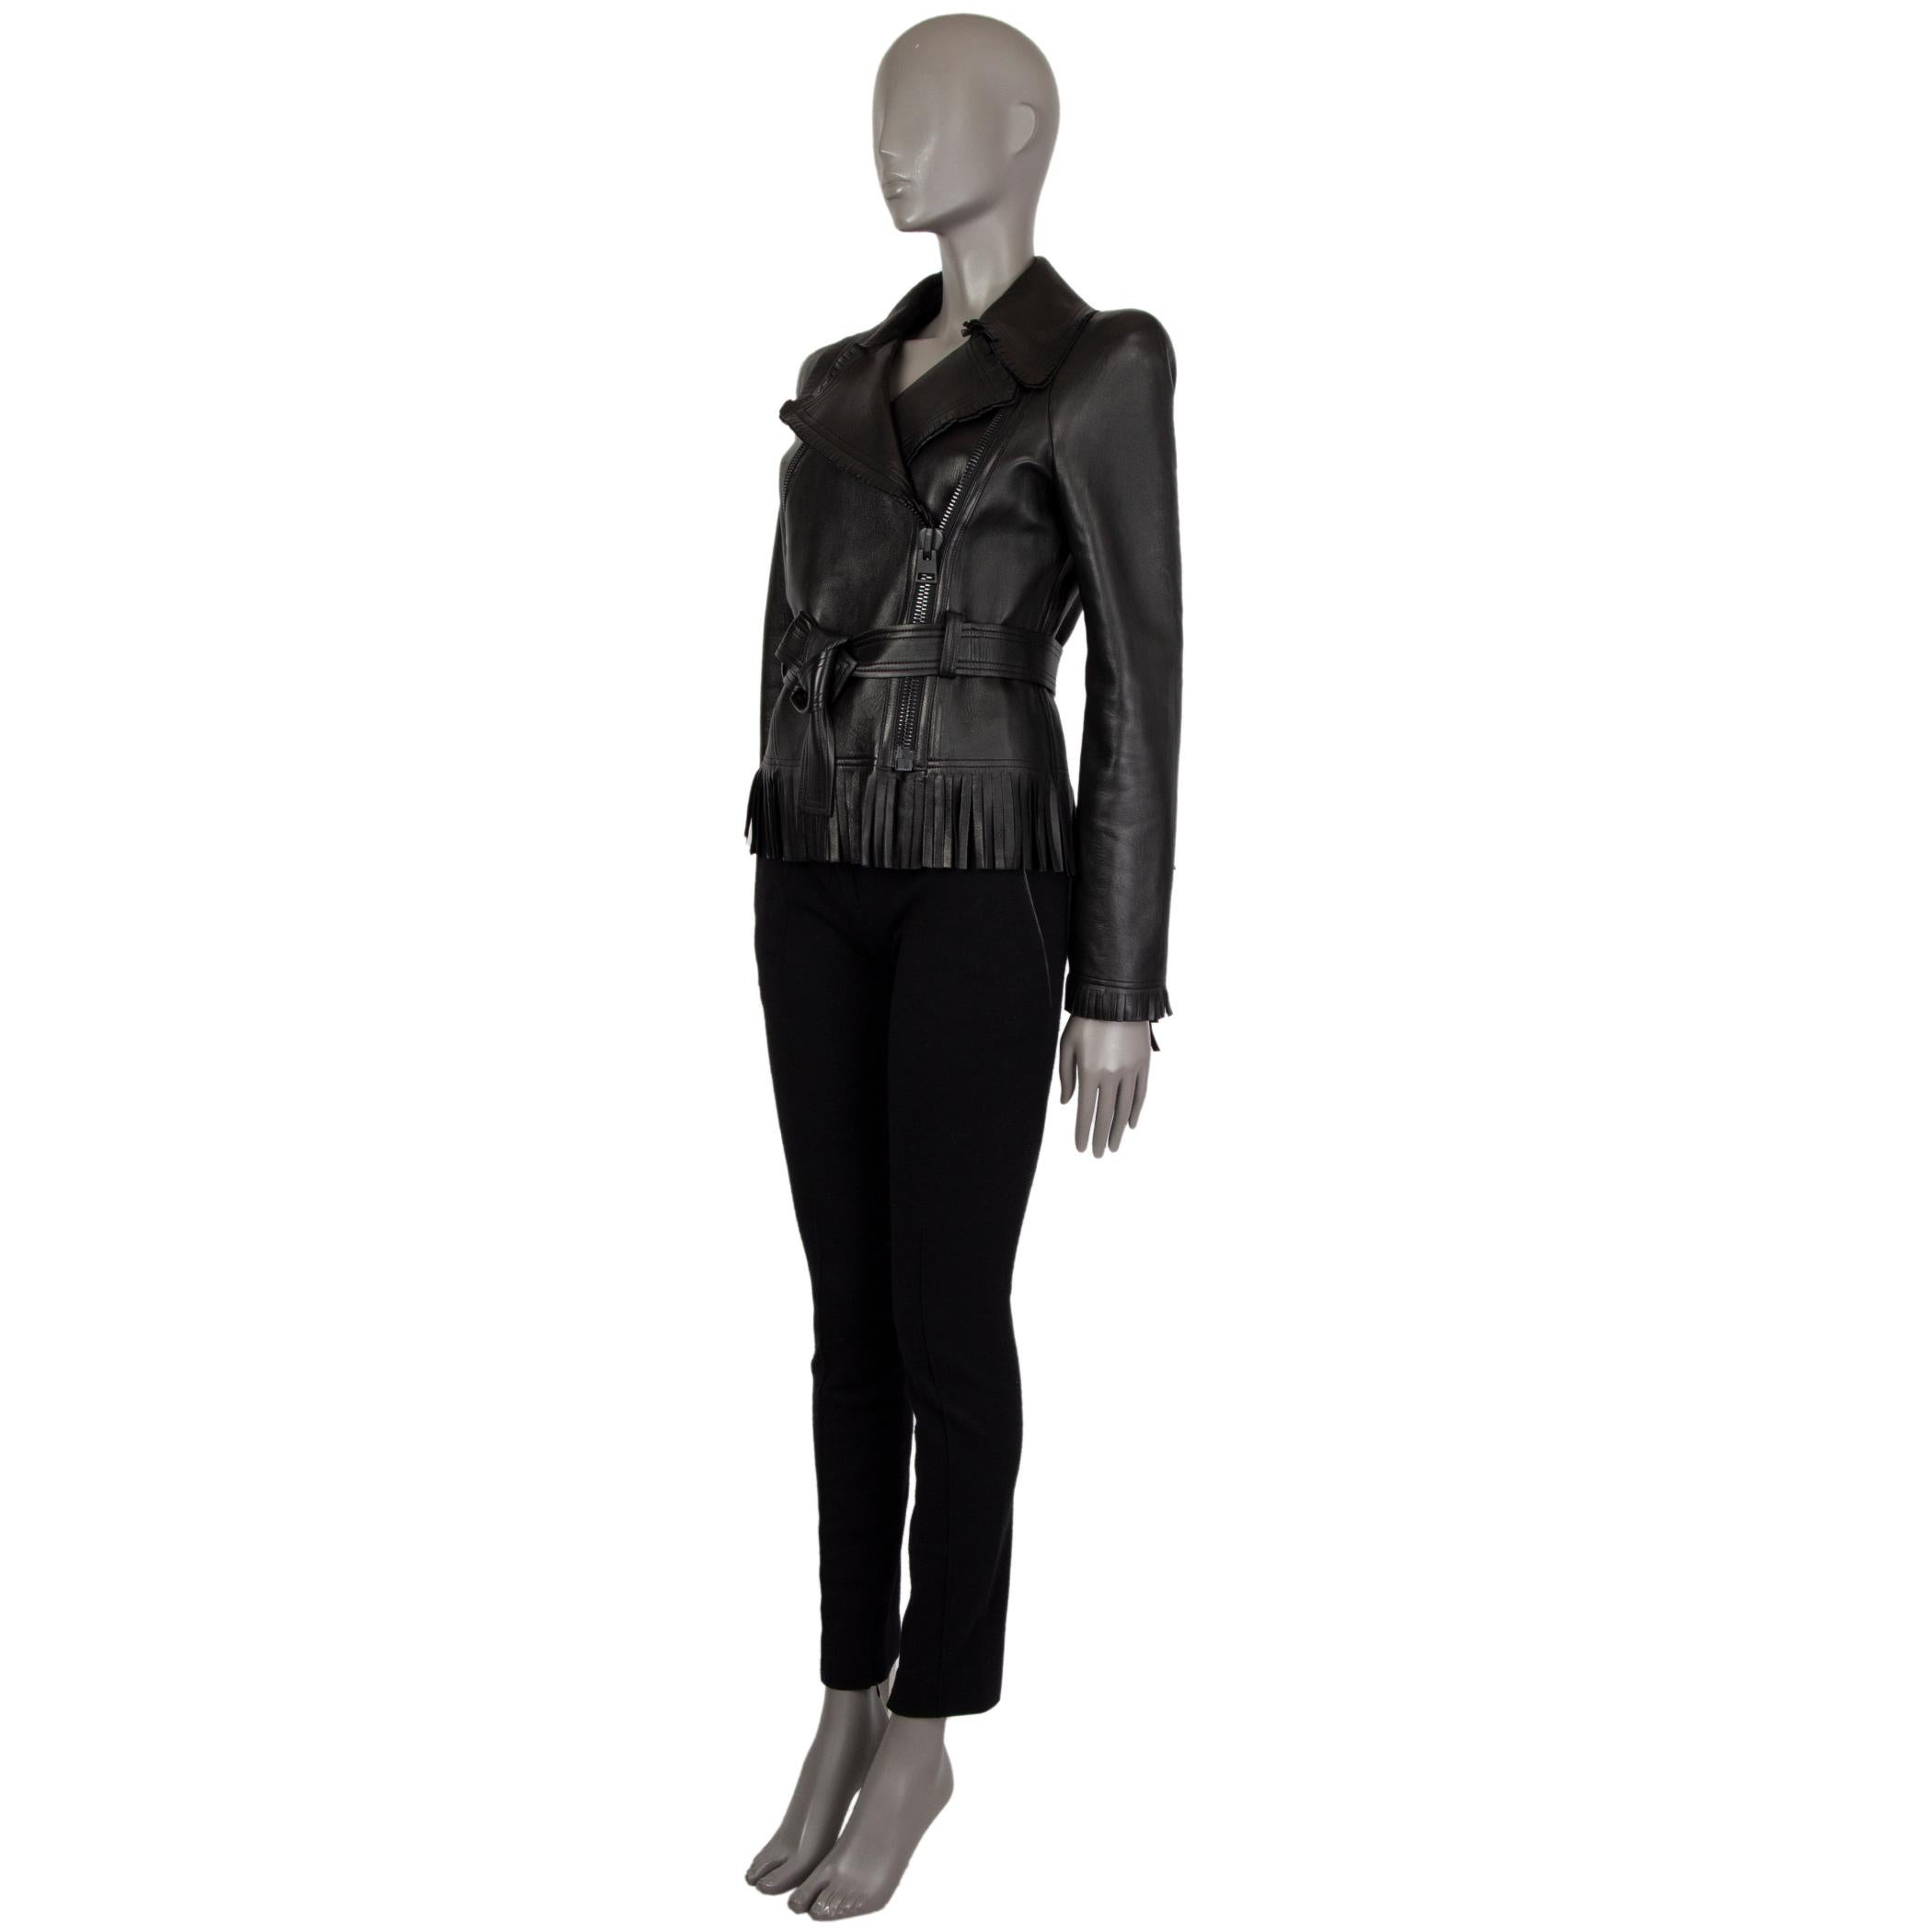 Tom Ford biker jacket in black leather. With short and medium-length wide fringe trims, storm flap on the back, one diagonal zipper pocket on the chest, and belt loops around the waist. Closes with wide zipper on the front in black metal. Lined in